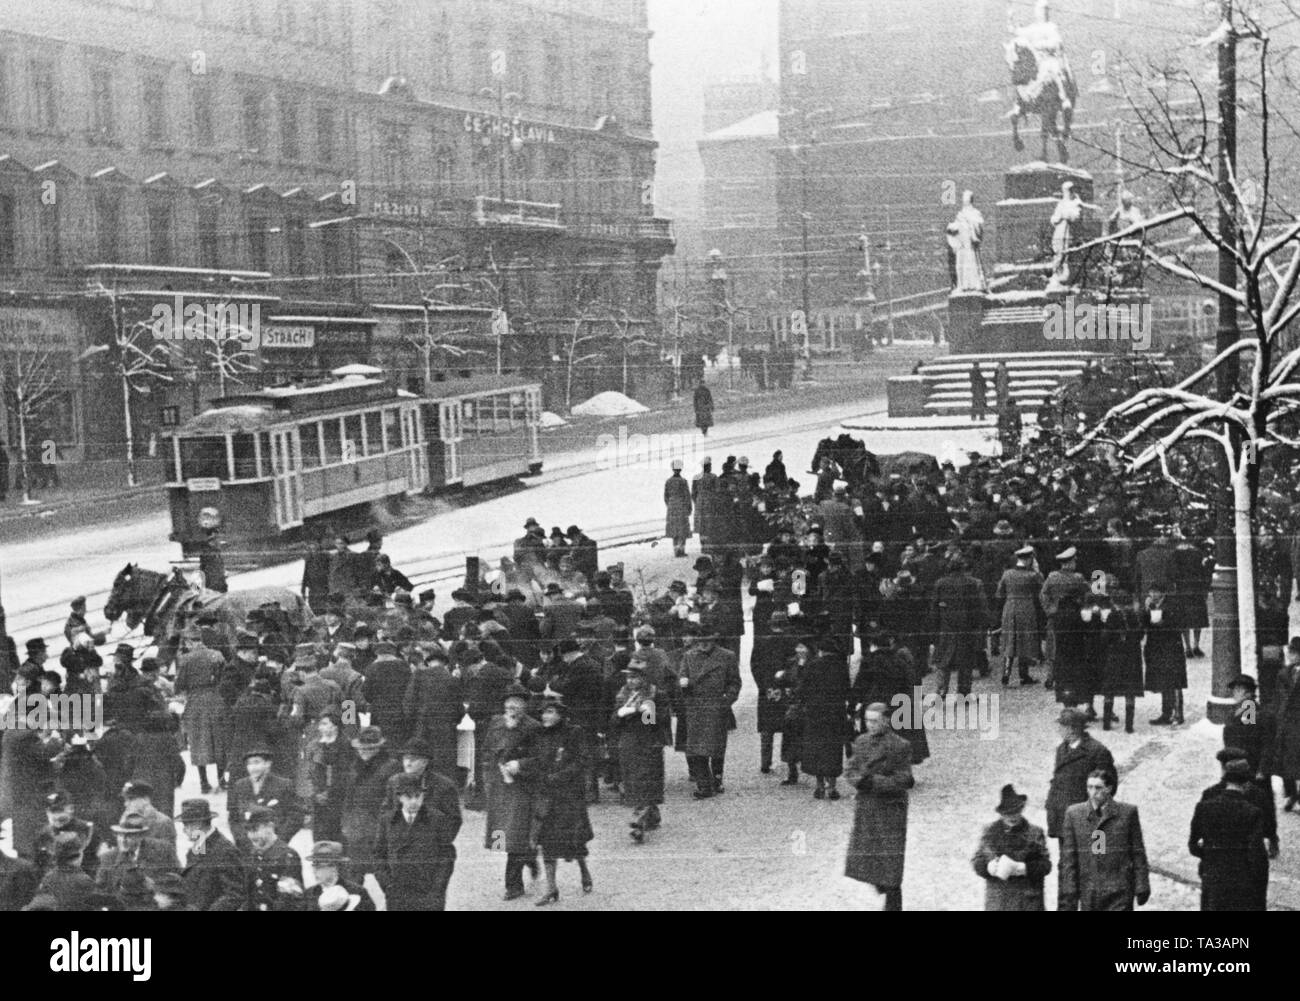 After the establishment of the Protectorate of Bohemia and Moravia, the 'Einpot Sonntag' takes place at Wenceslas Square. All families of the German Reich were supposed to eat stew on Sunday once a month. Stock Photo